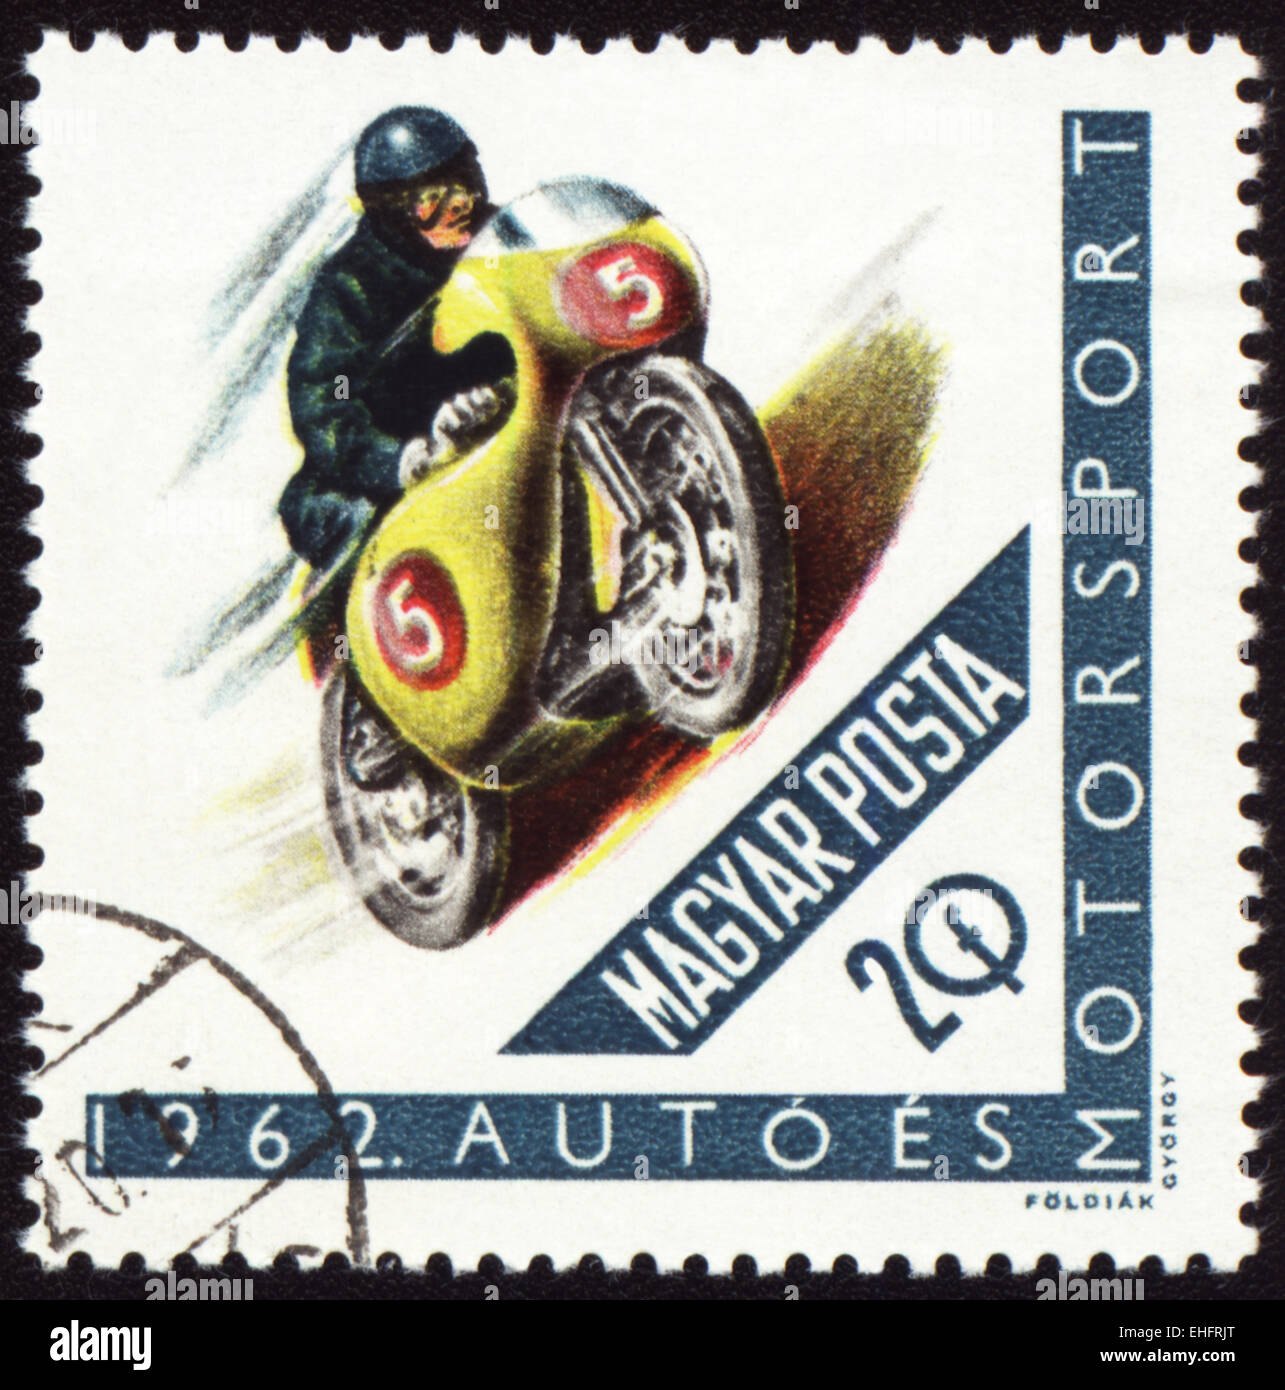 HUNGARY - CIRCA 1962: A stamp printed in Hungary shows motorcyclist Stock Photo